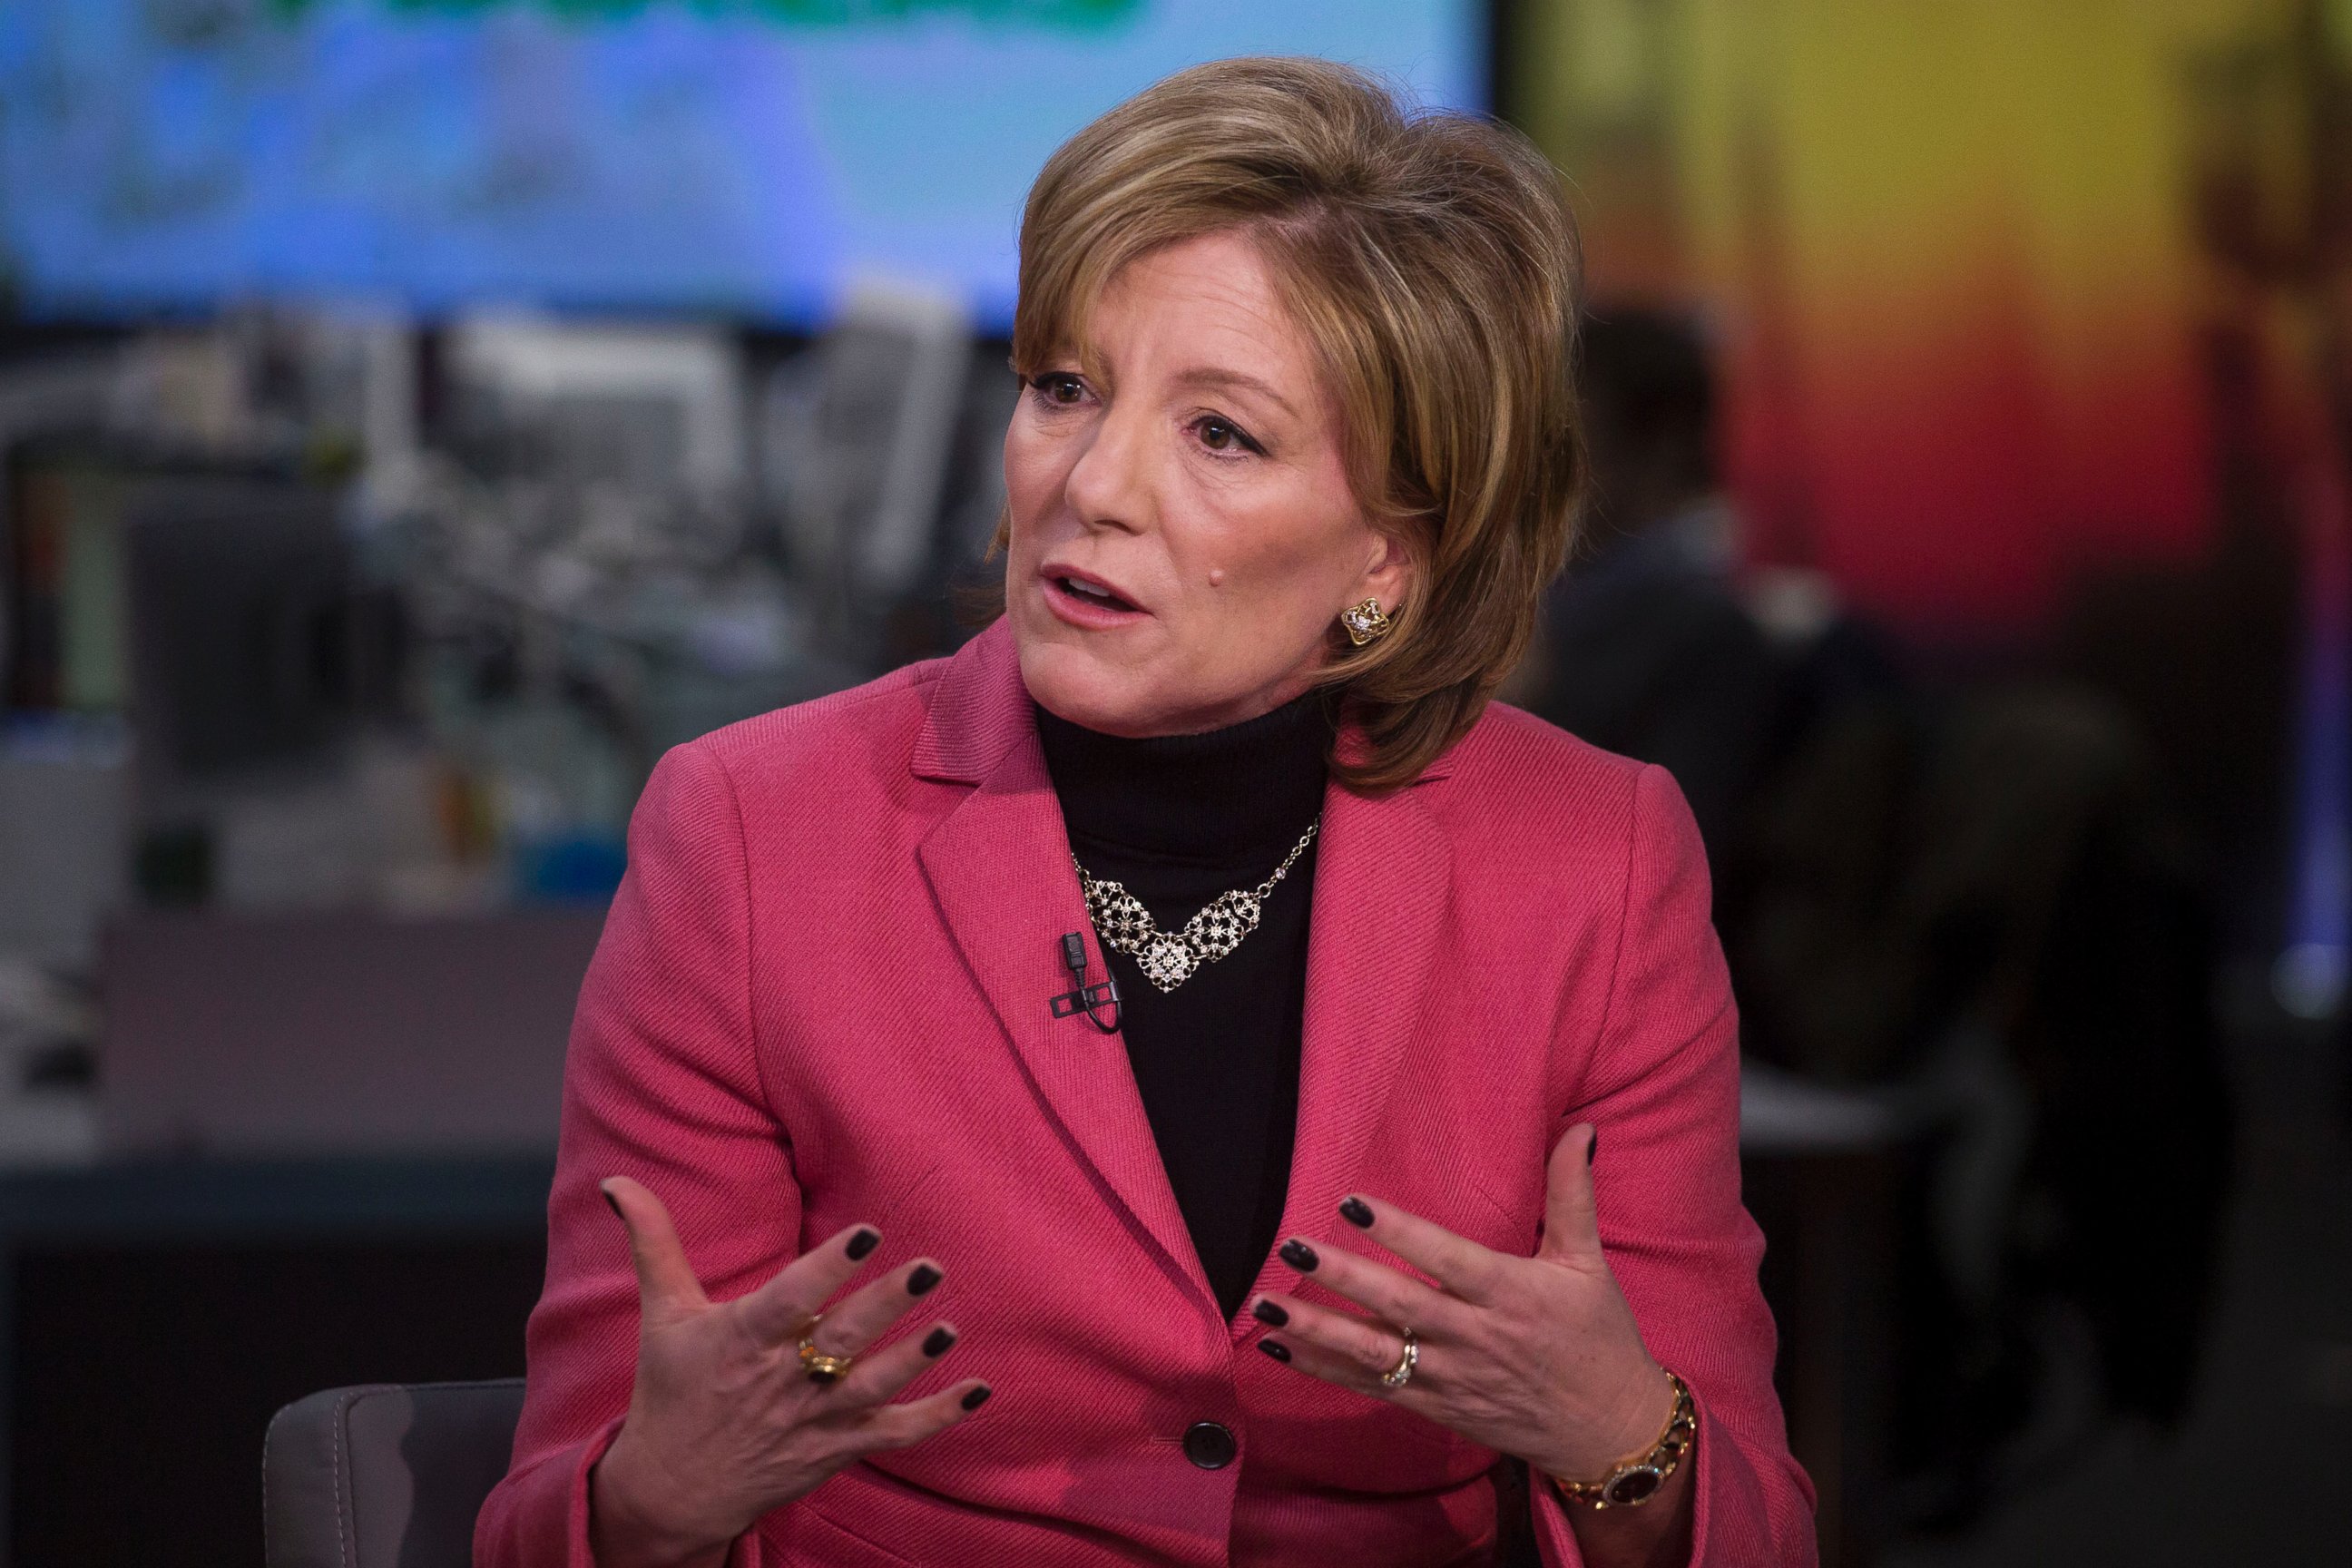 PHOTO: Sherilyn McCoy, chief executive officer of Avon Products Inc., speaks during a Bloomberg Television interview on March 6, 2015 in New York City.